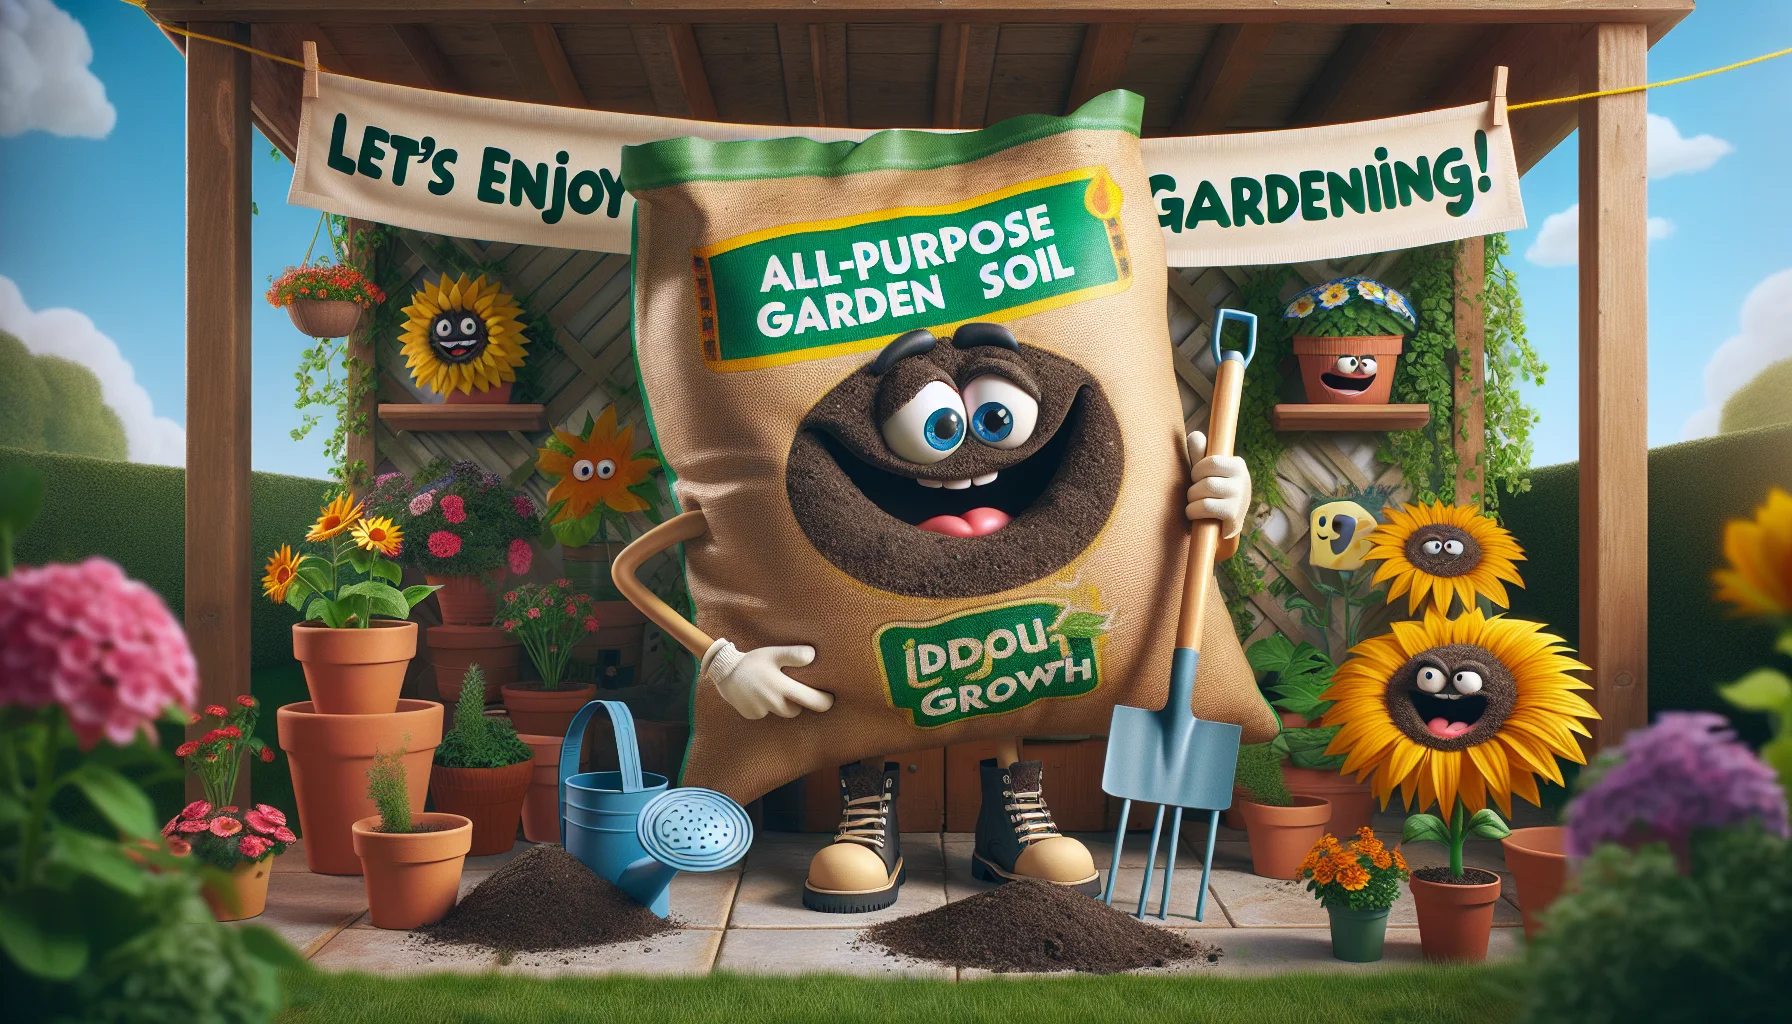 A humorous and realistic scenario showcasing a bag of all-purpose garden soil, labelled as 'Ideal Growth', in a quaint little garden. The garden soil bag is depicted with cartoonish eyes and a big grin, holding a rake and a watering can, as if ready to help in gardening. Excited plants around are practically jumping out of the pots as if roaring for this soil. A banner flies overhead, reading 'Let's enjoy gardening!'. The vibrant flowers, lush green plants, and a sunflower with a sunhat, add to the charming and playful ambiance, encouraging the spectators to indulge in gardening.